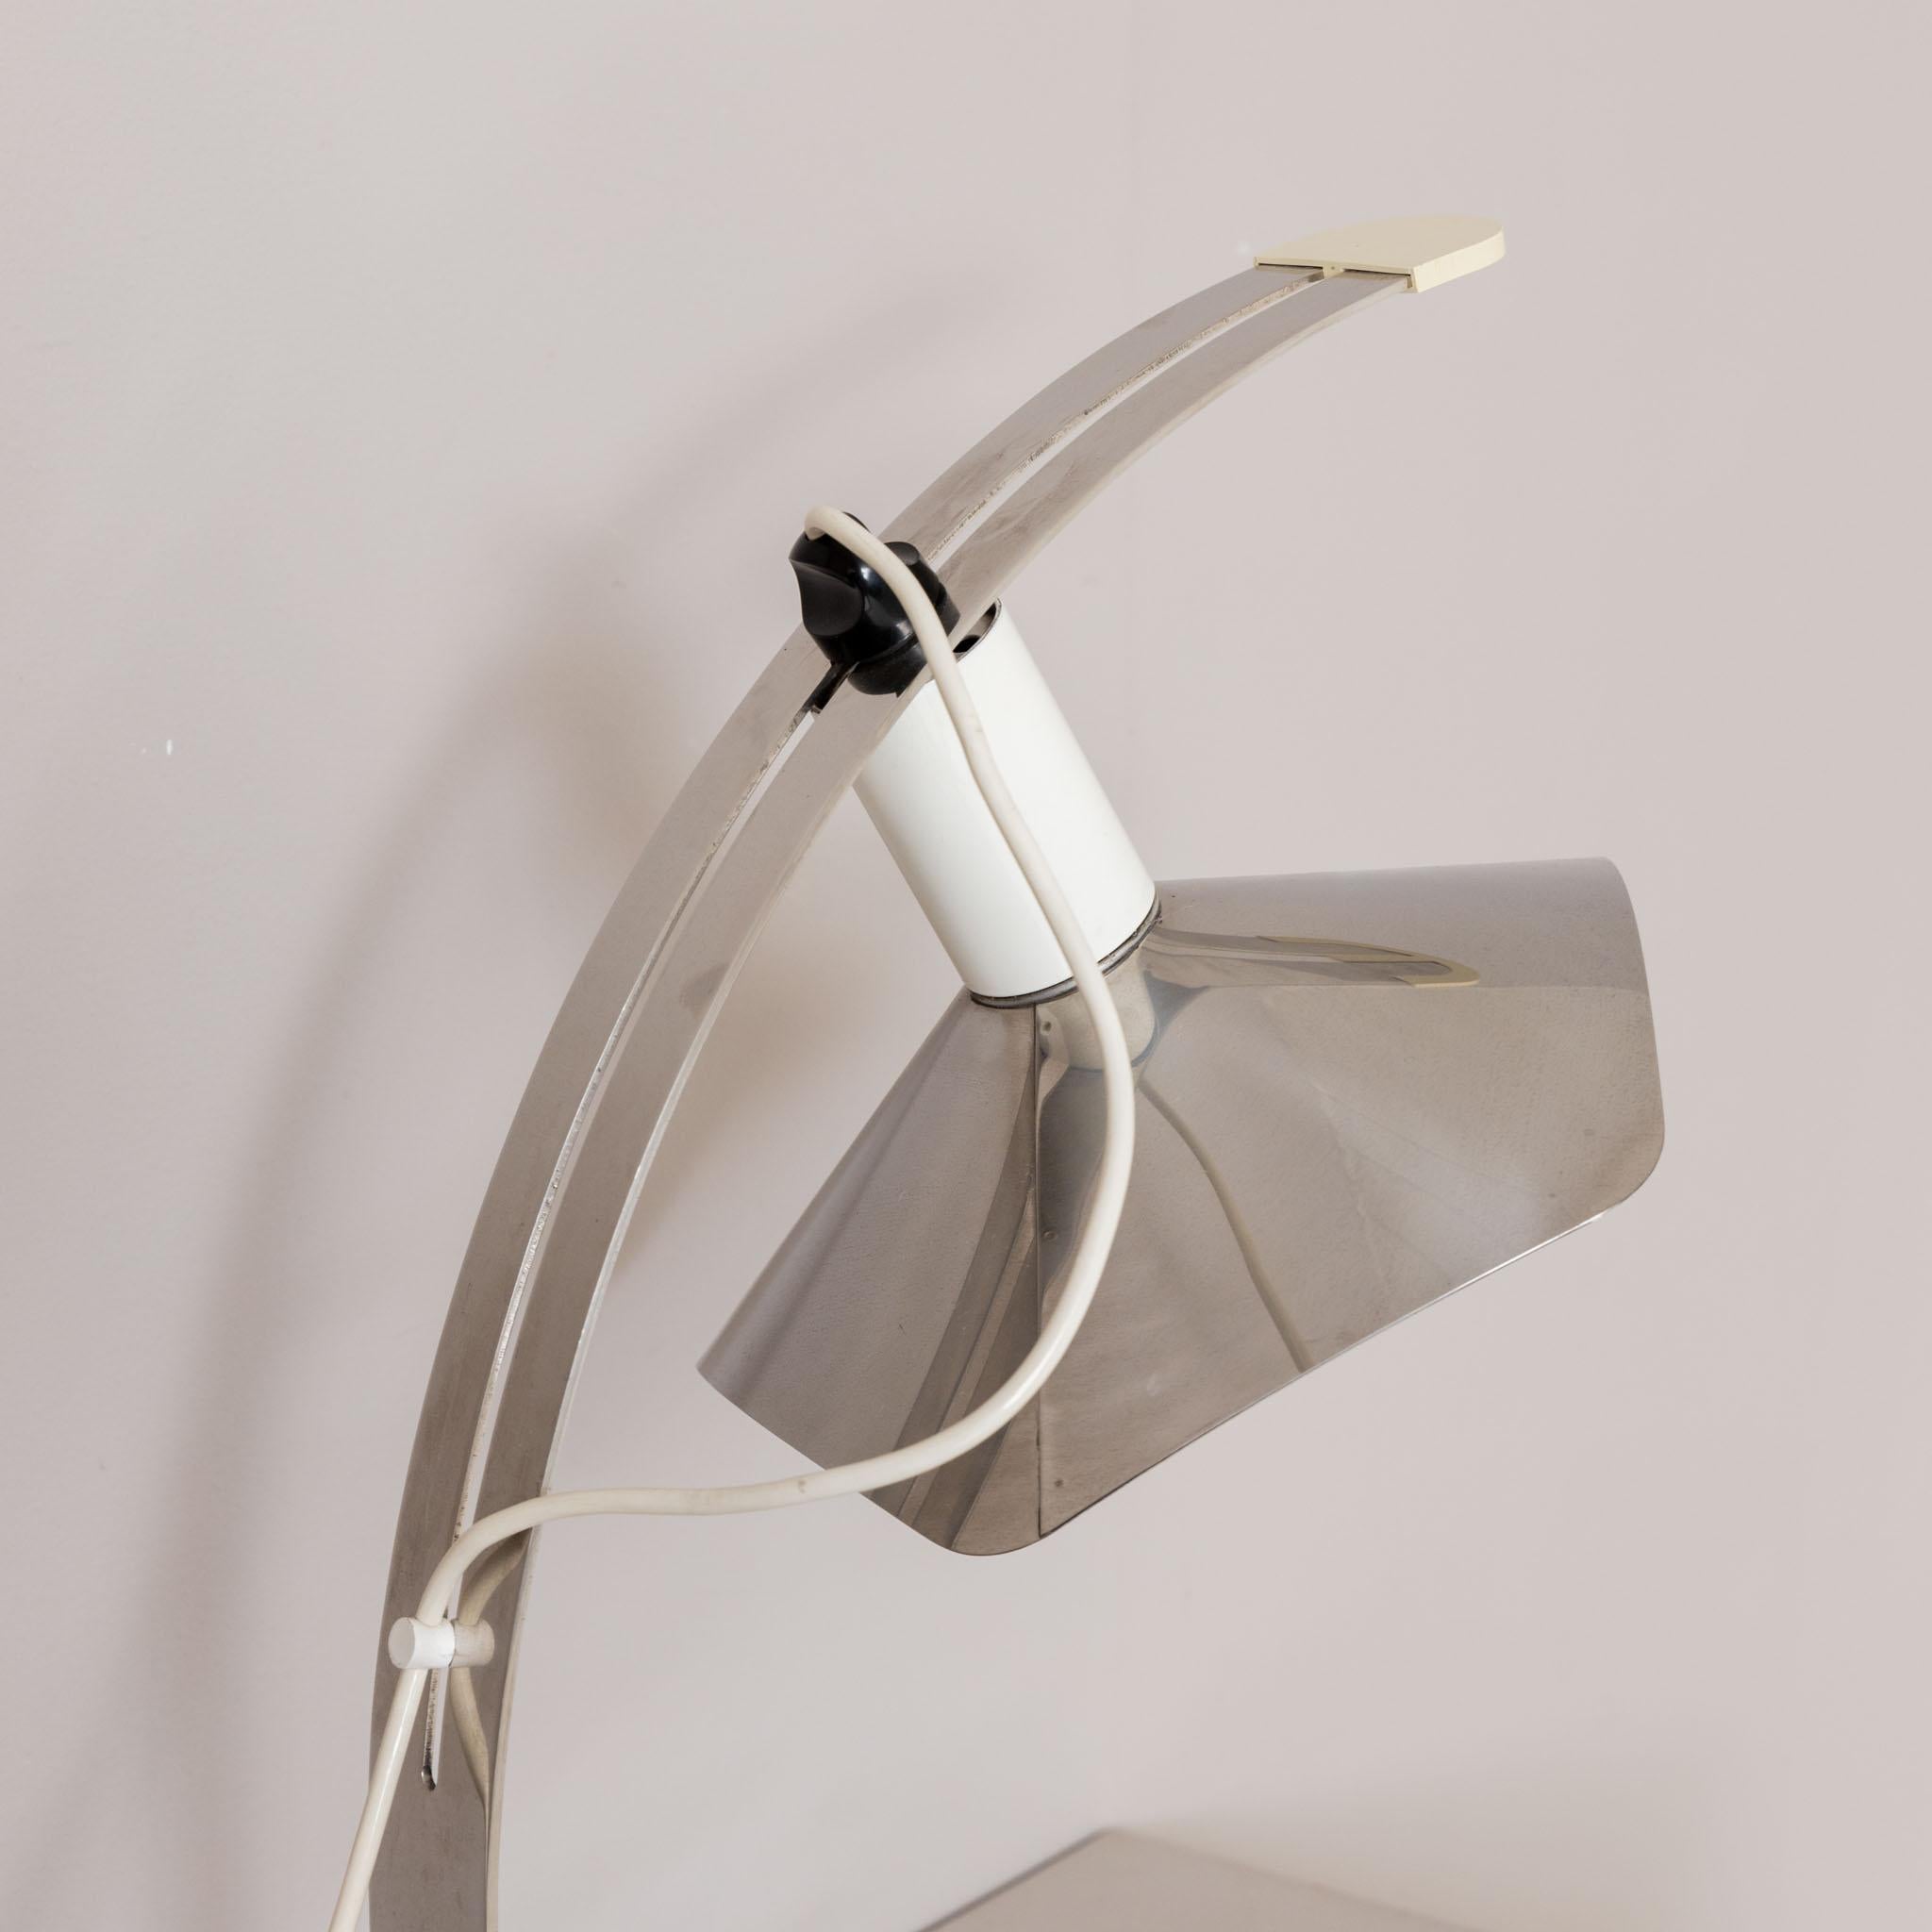 Italian White Table Lamp “Corolla” by G. Grignani for Luci, Italy 1970s For Sale